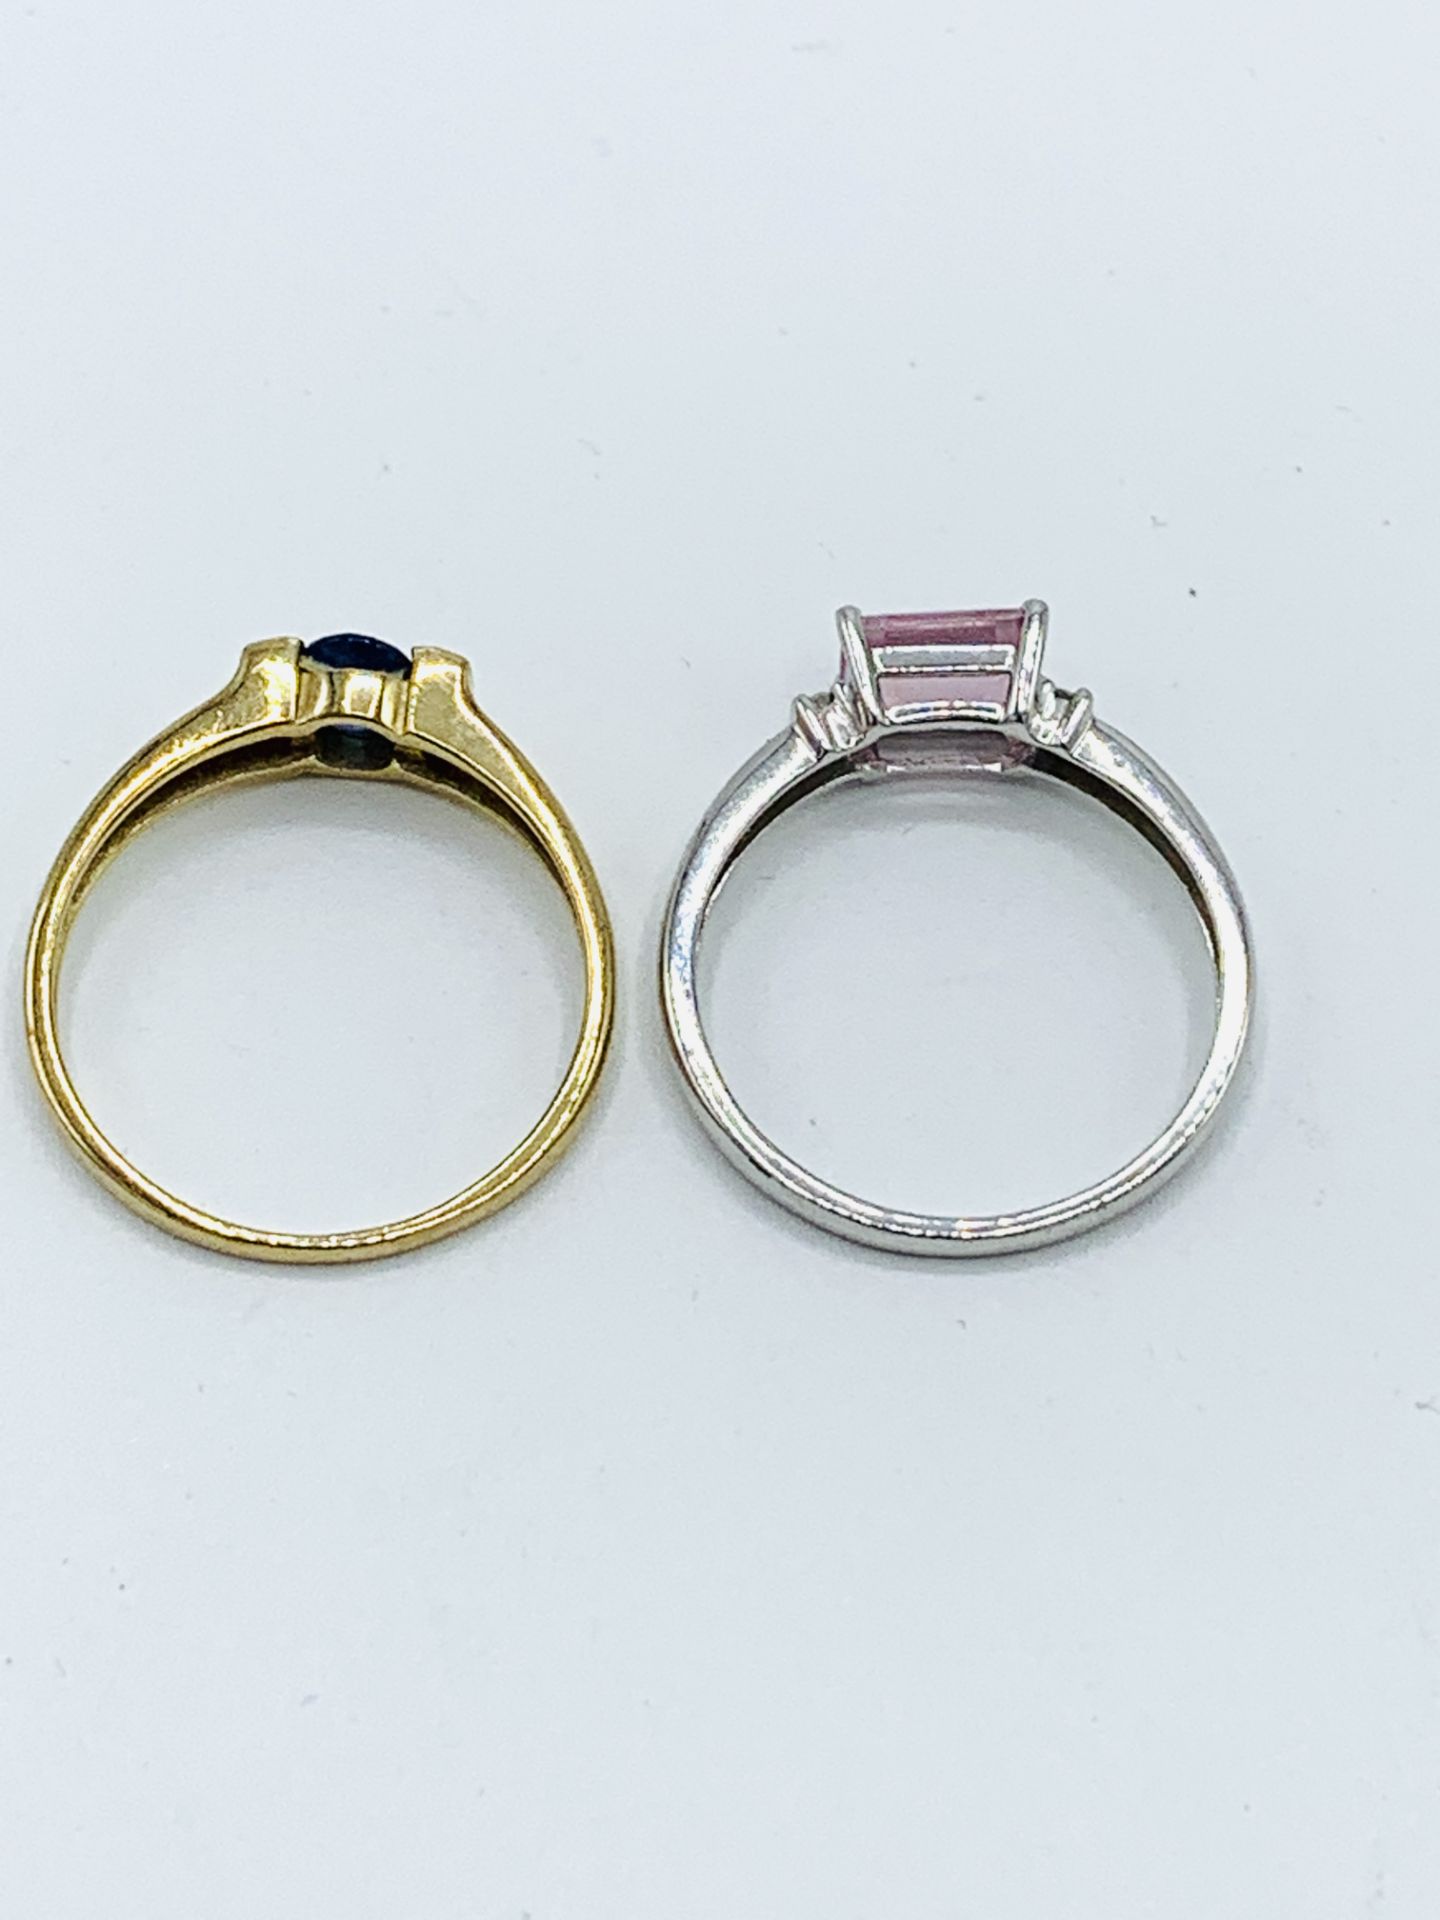 Two 9ct gold rings - Image 2 of 4